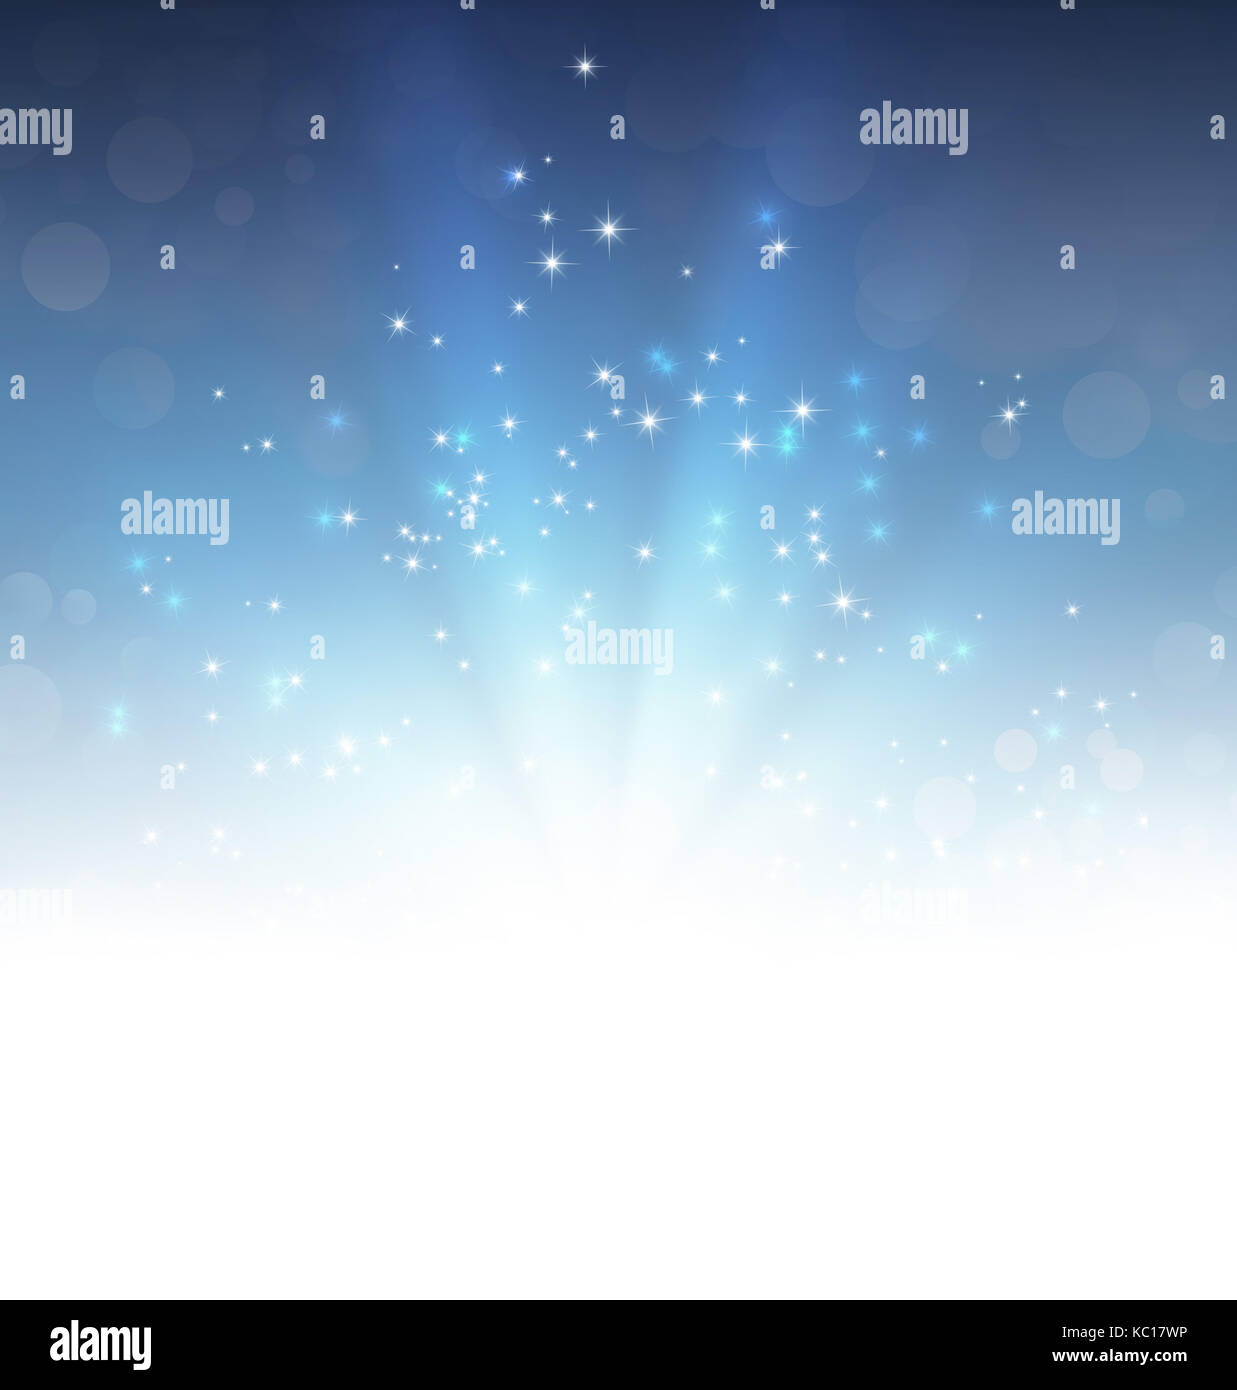 Light explosion and glittering stars on a festive blue background Stock Photo